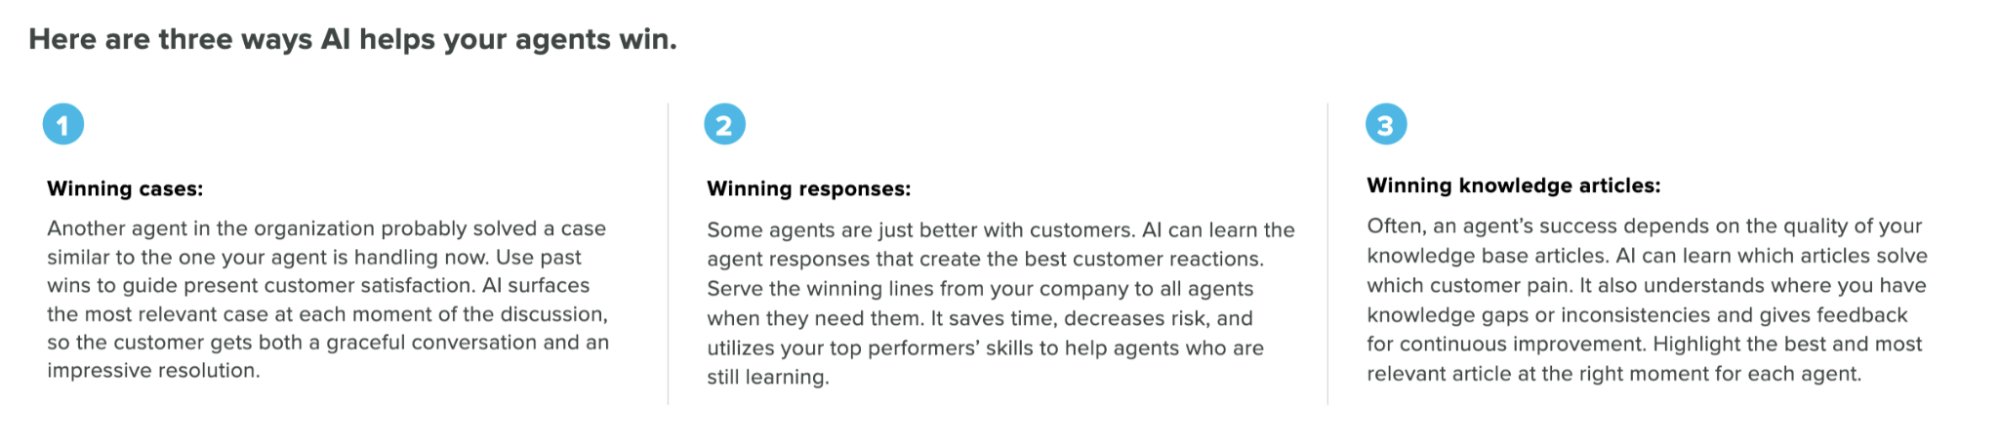 An infographic illustrating how AI can assist customer service agents